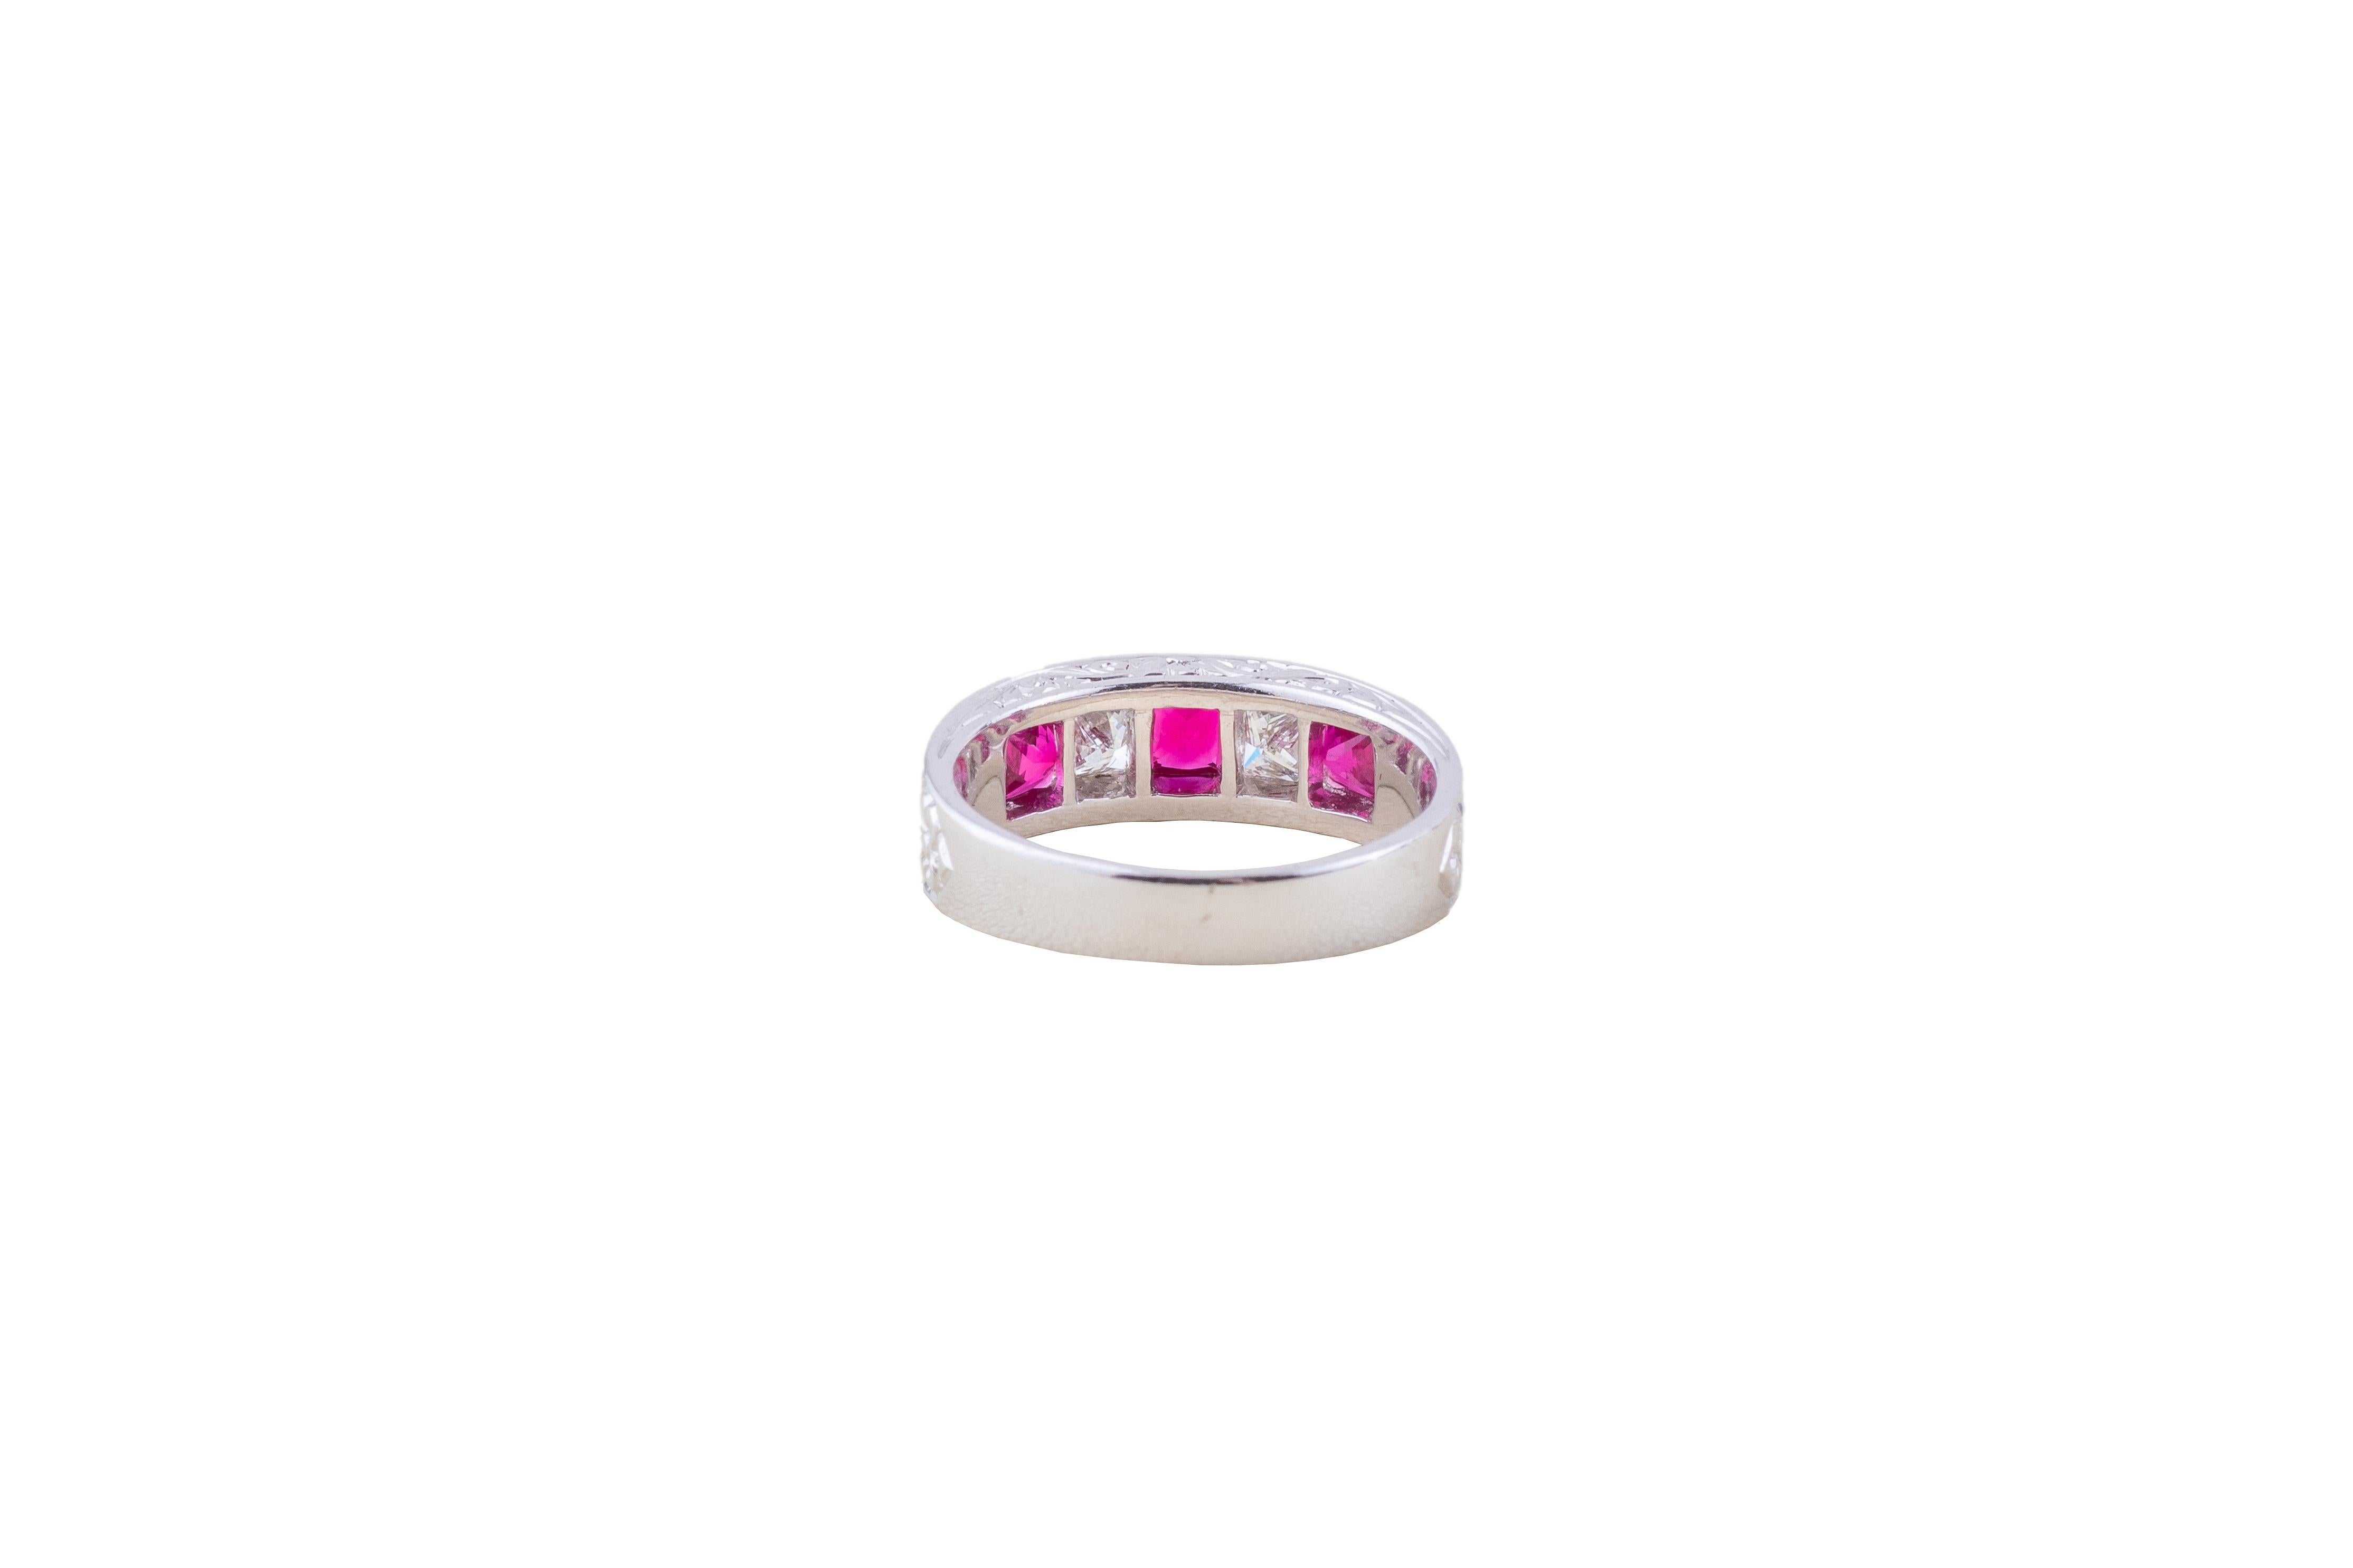 Baguette Cut Ruby Diamond Baquettes Ring in White Gold